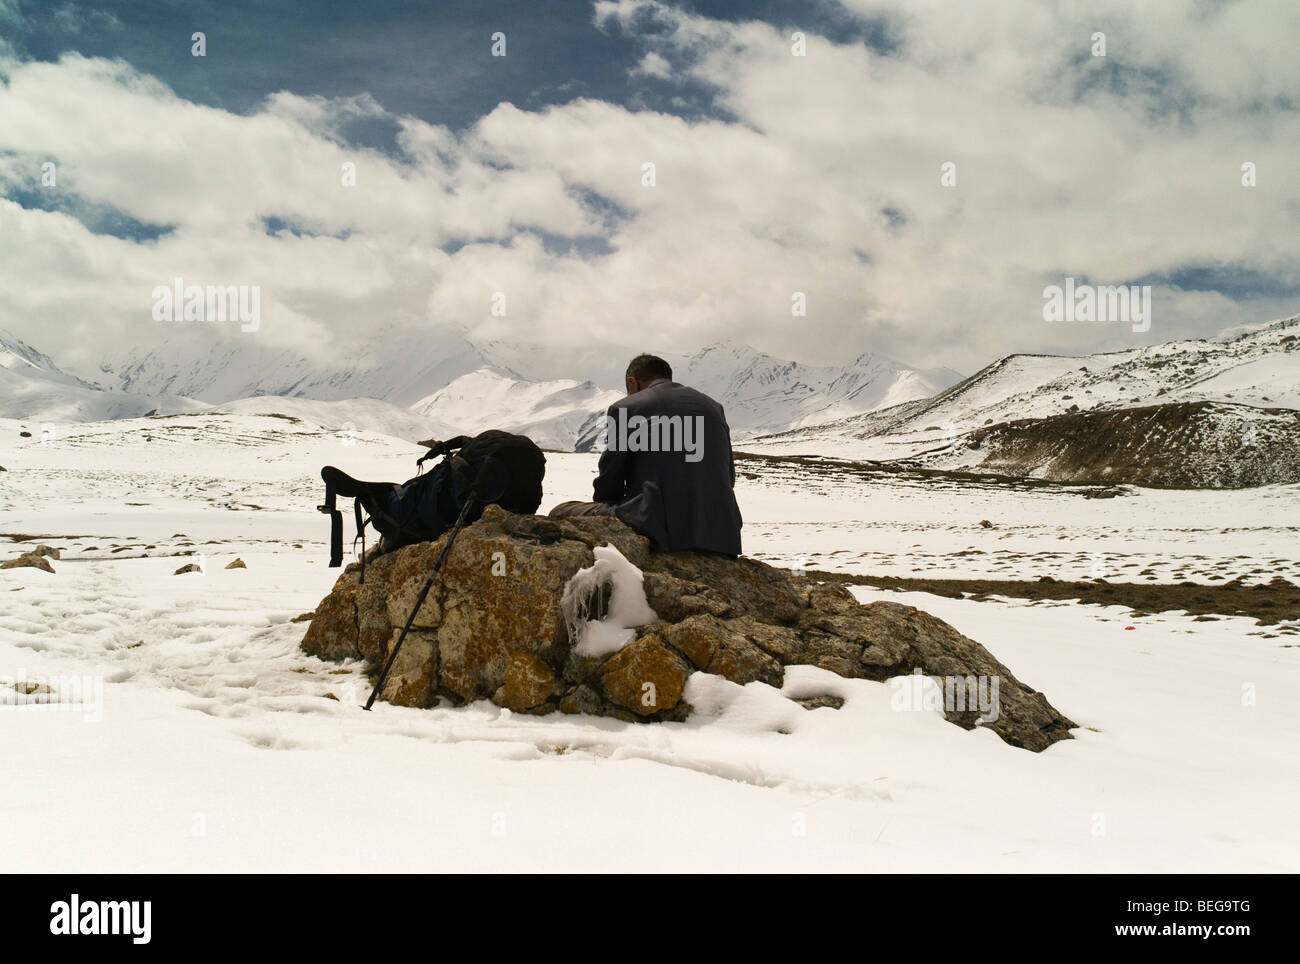 Man with backpack resting on a rock surrounded by snow in the Caucasian Mountains Stock Photo